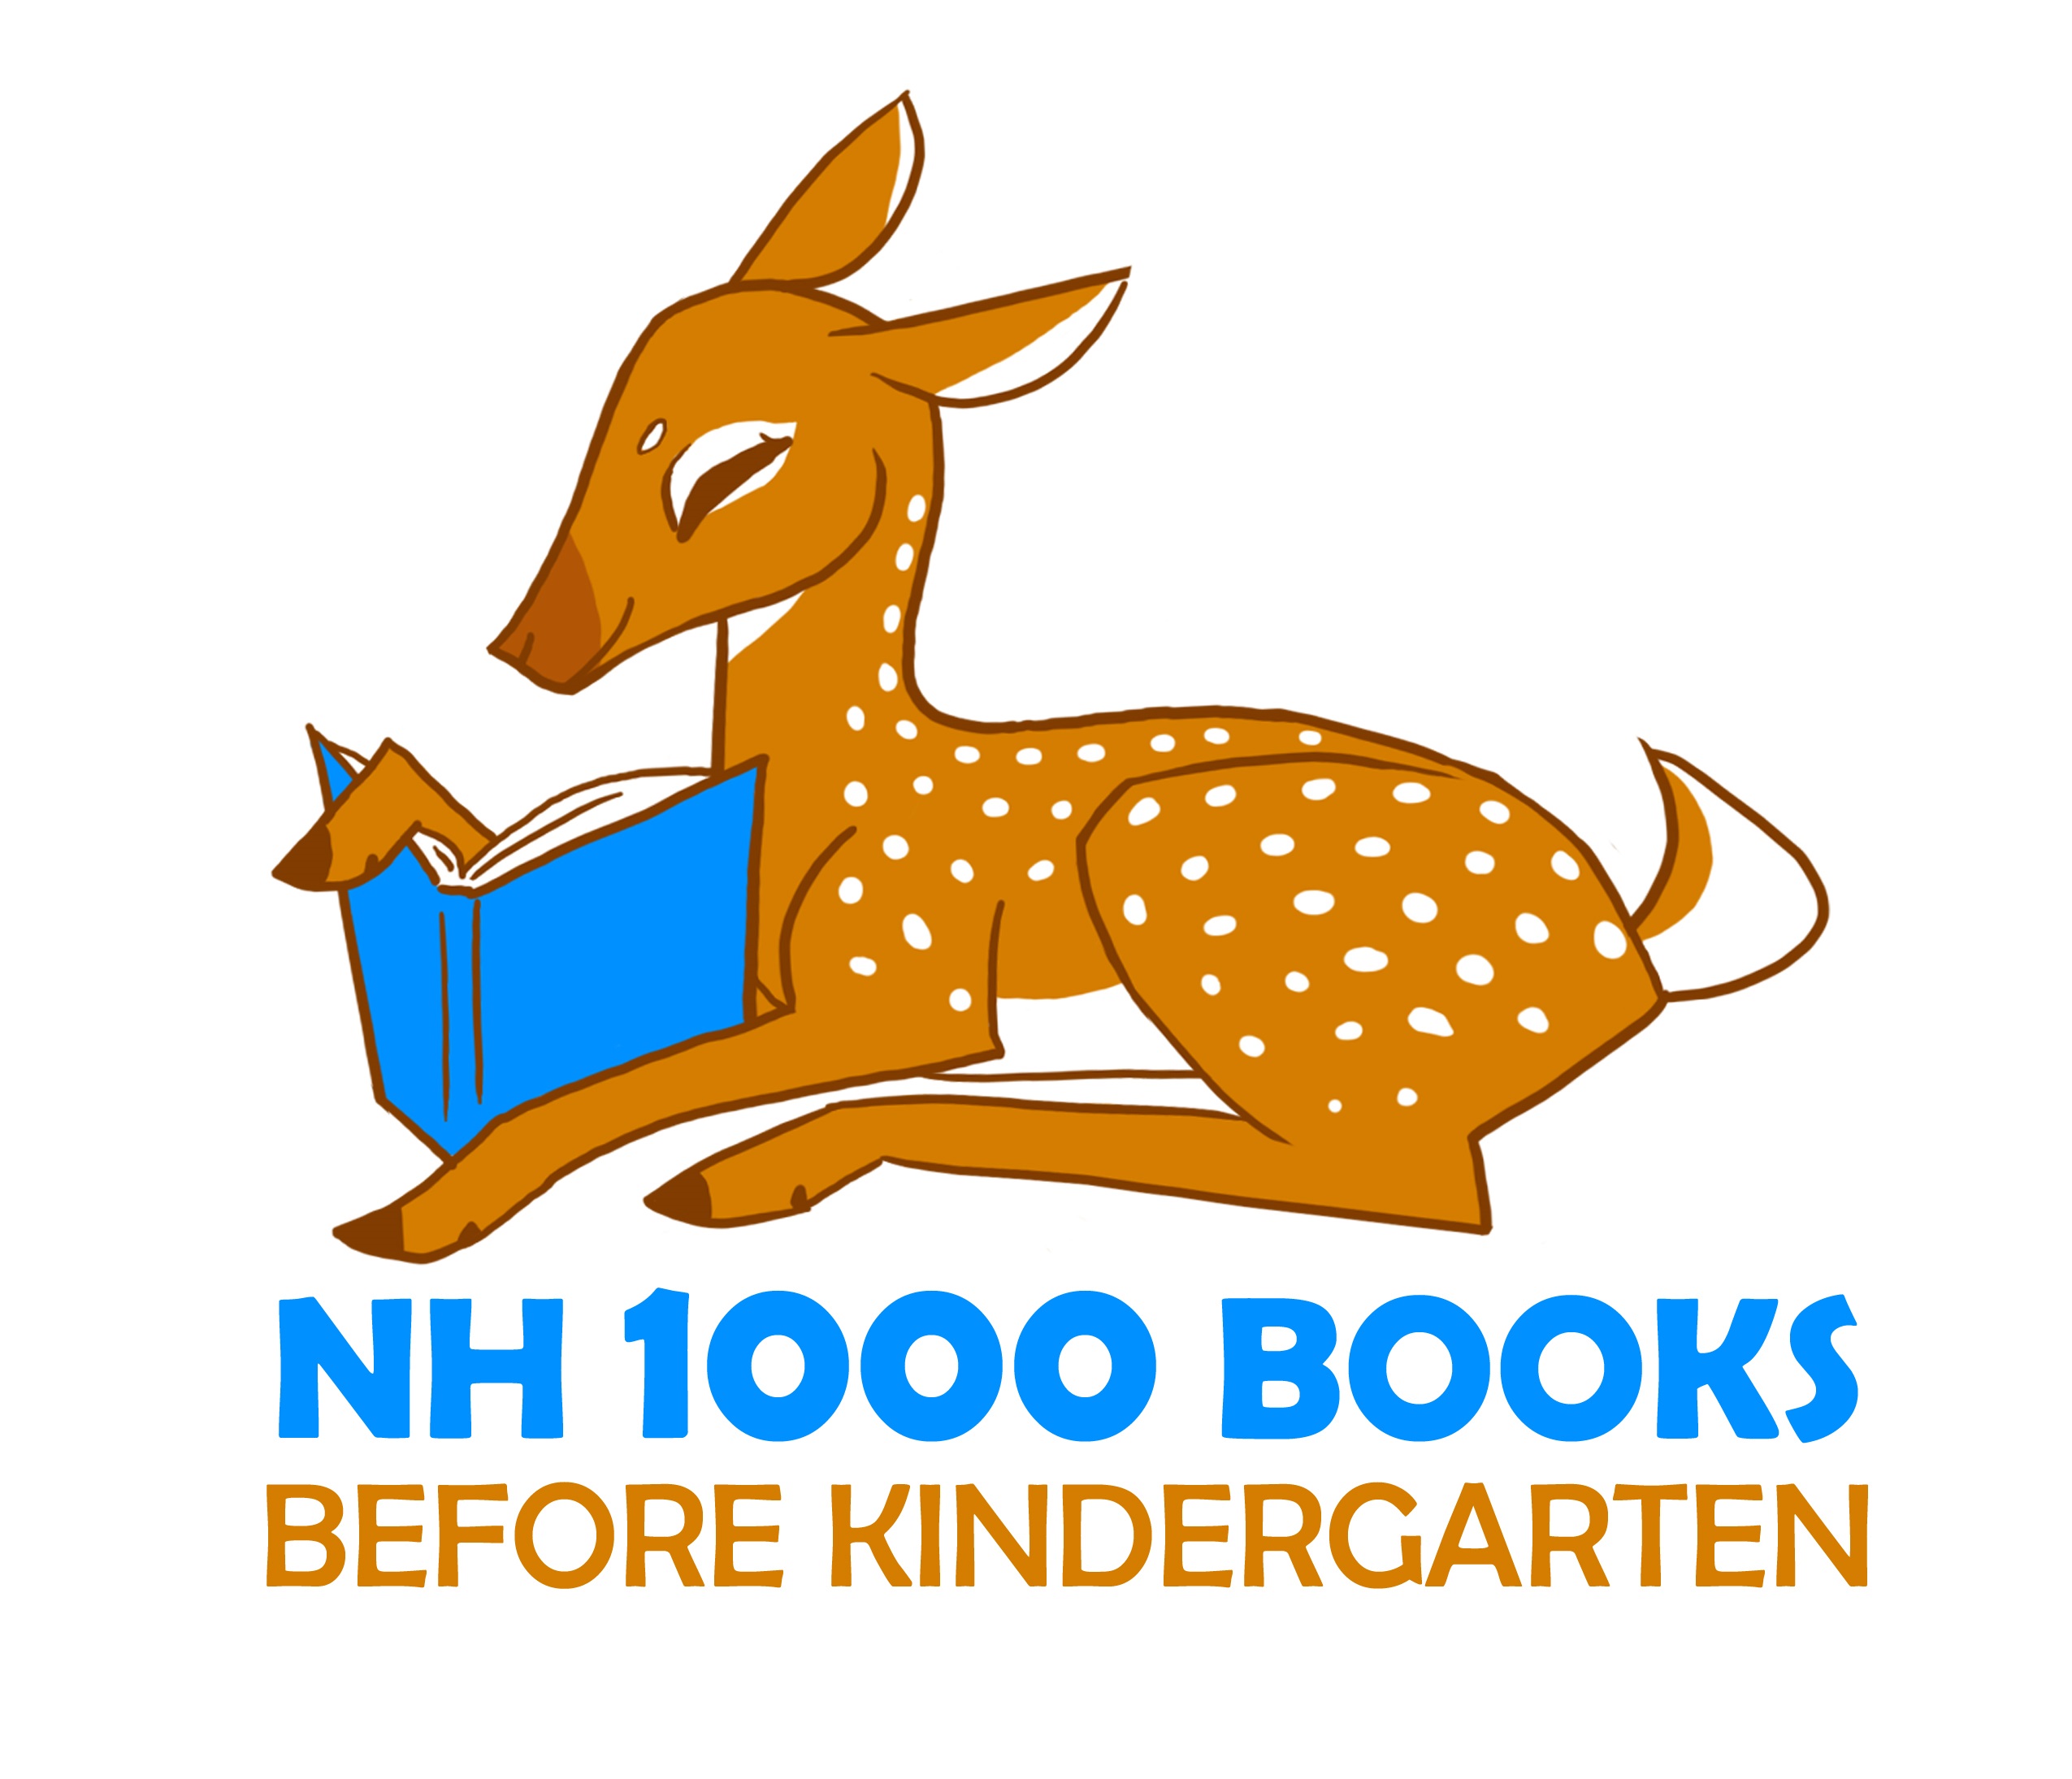 Drawing of a deer and logo for 1,000 books before kindergarten program